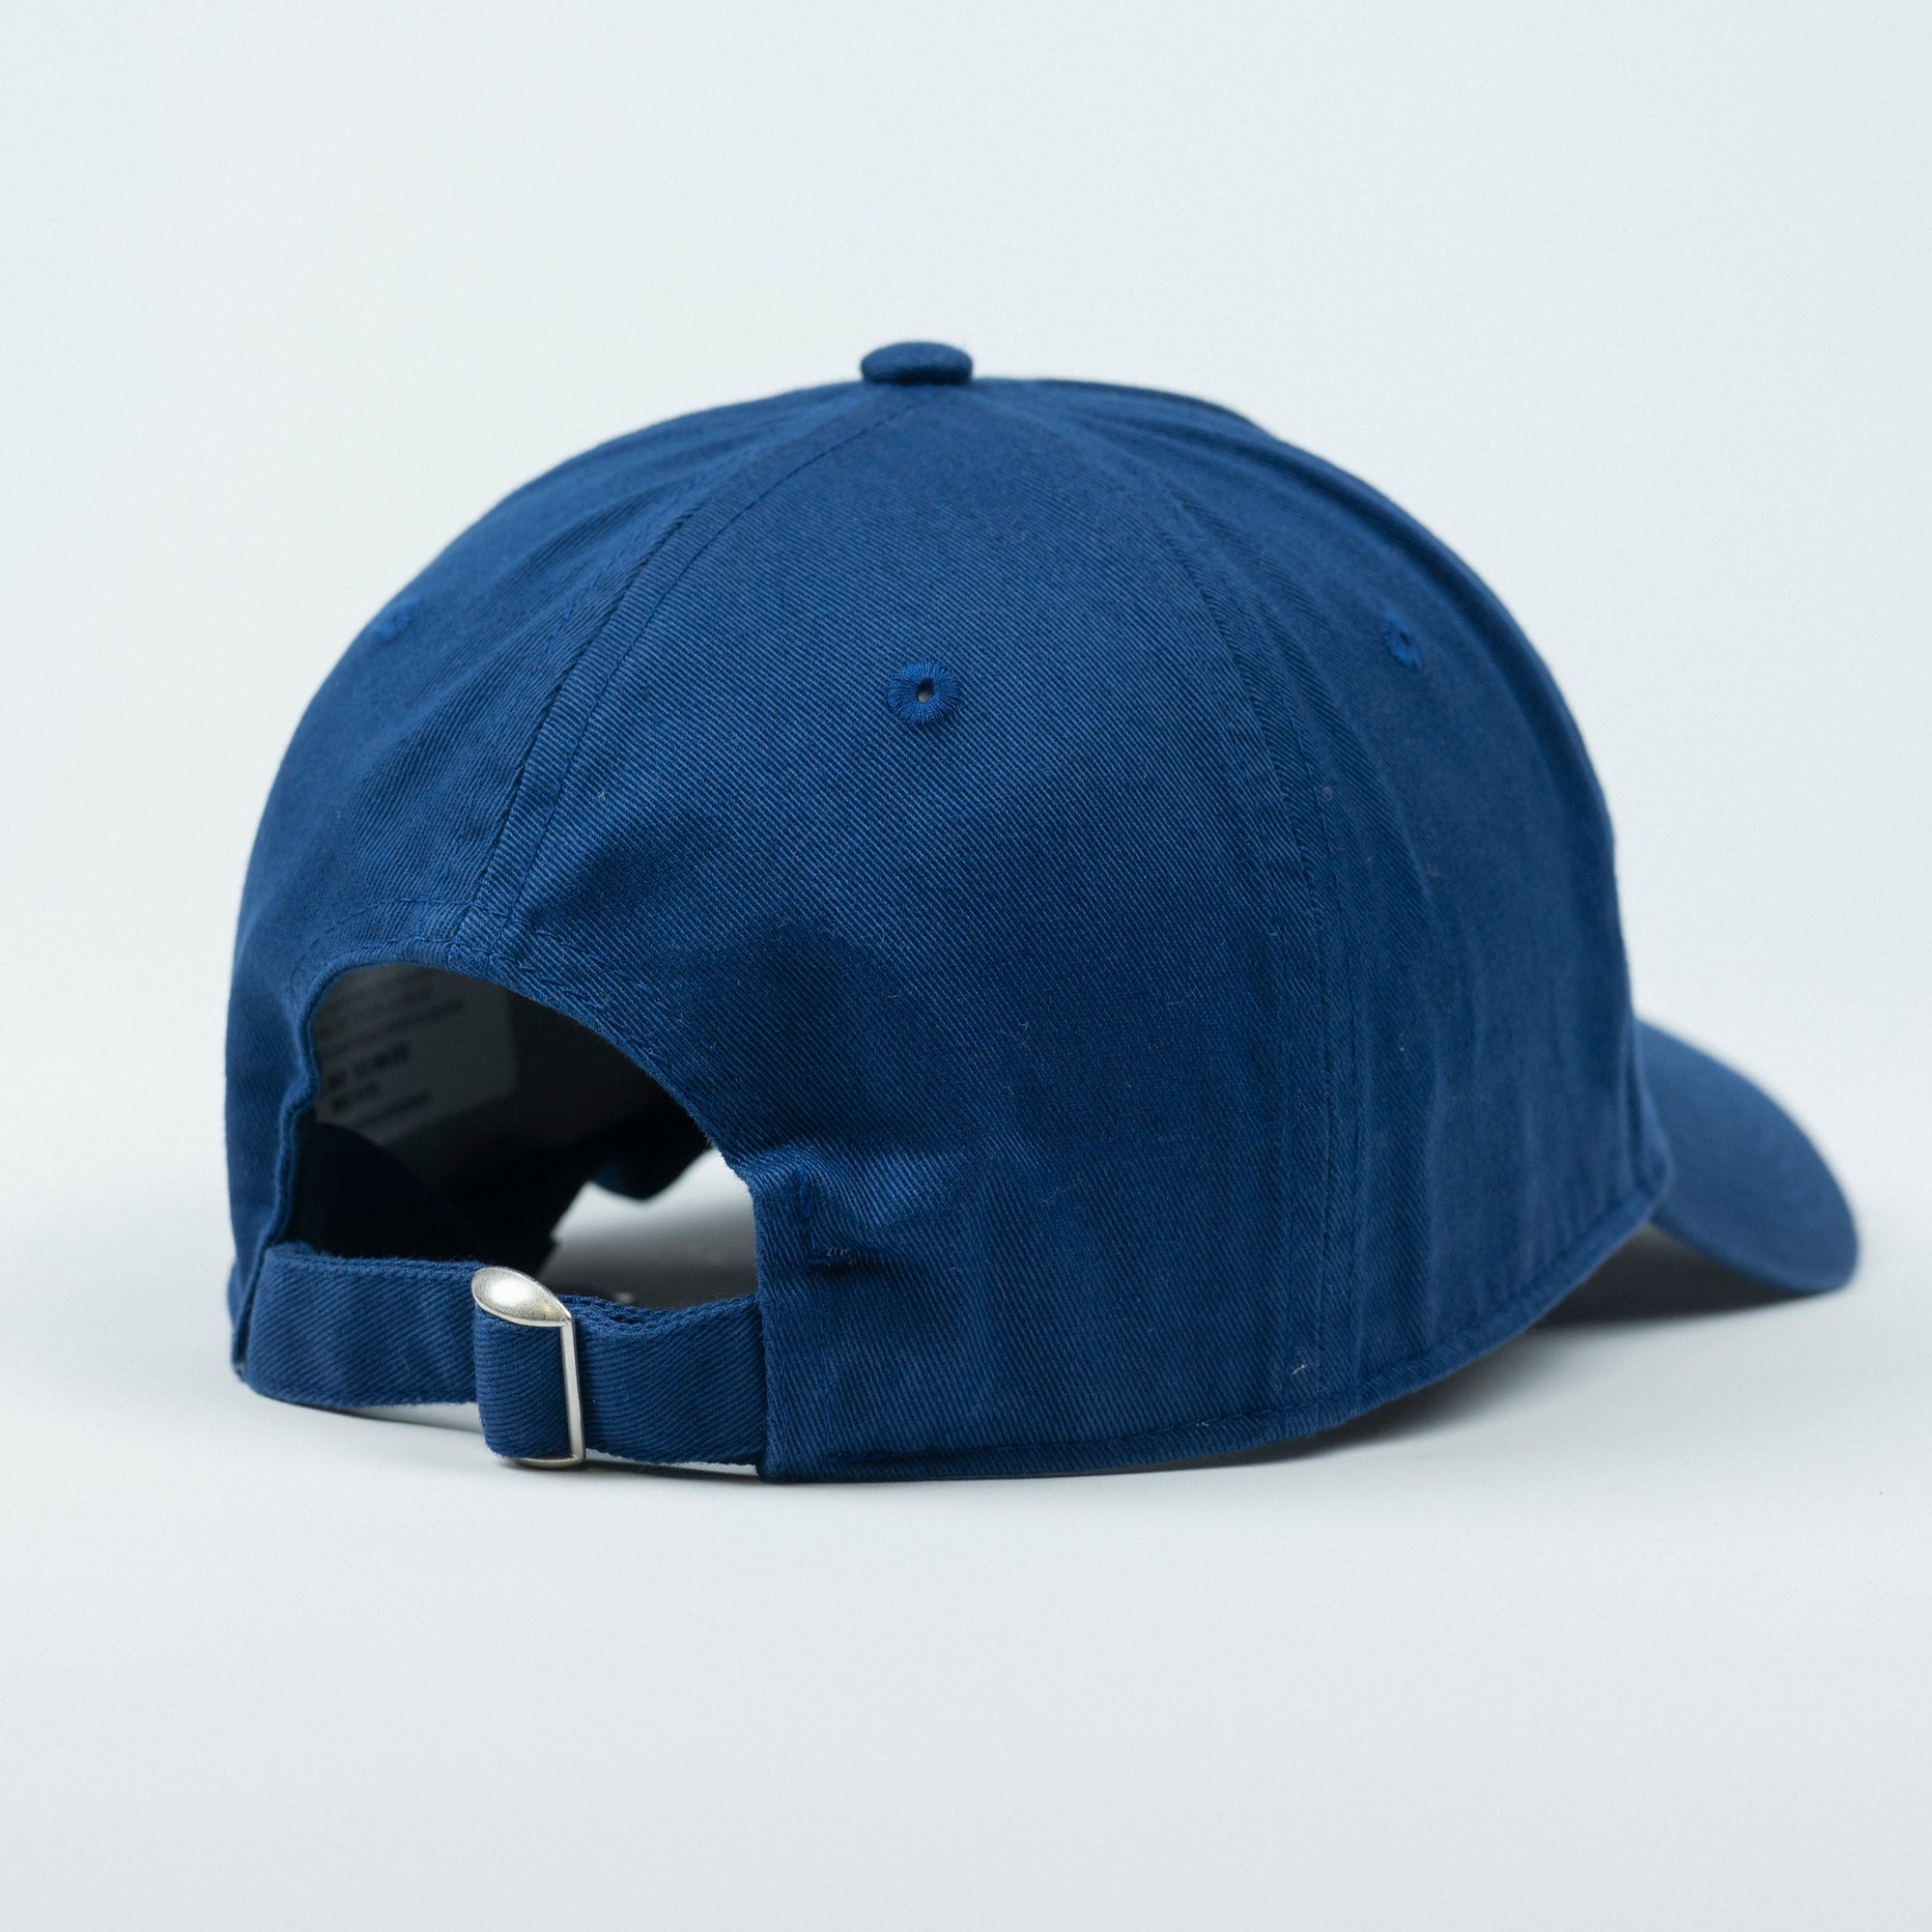 The Fried Egg and Smathers & Branson Hat - Navy